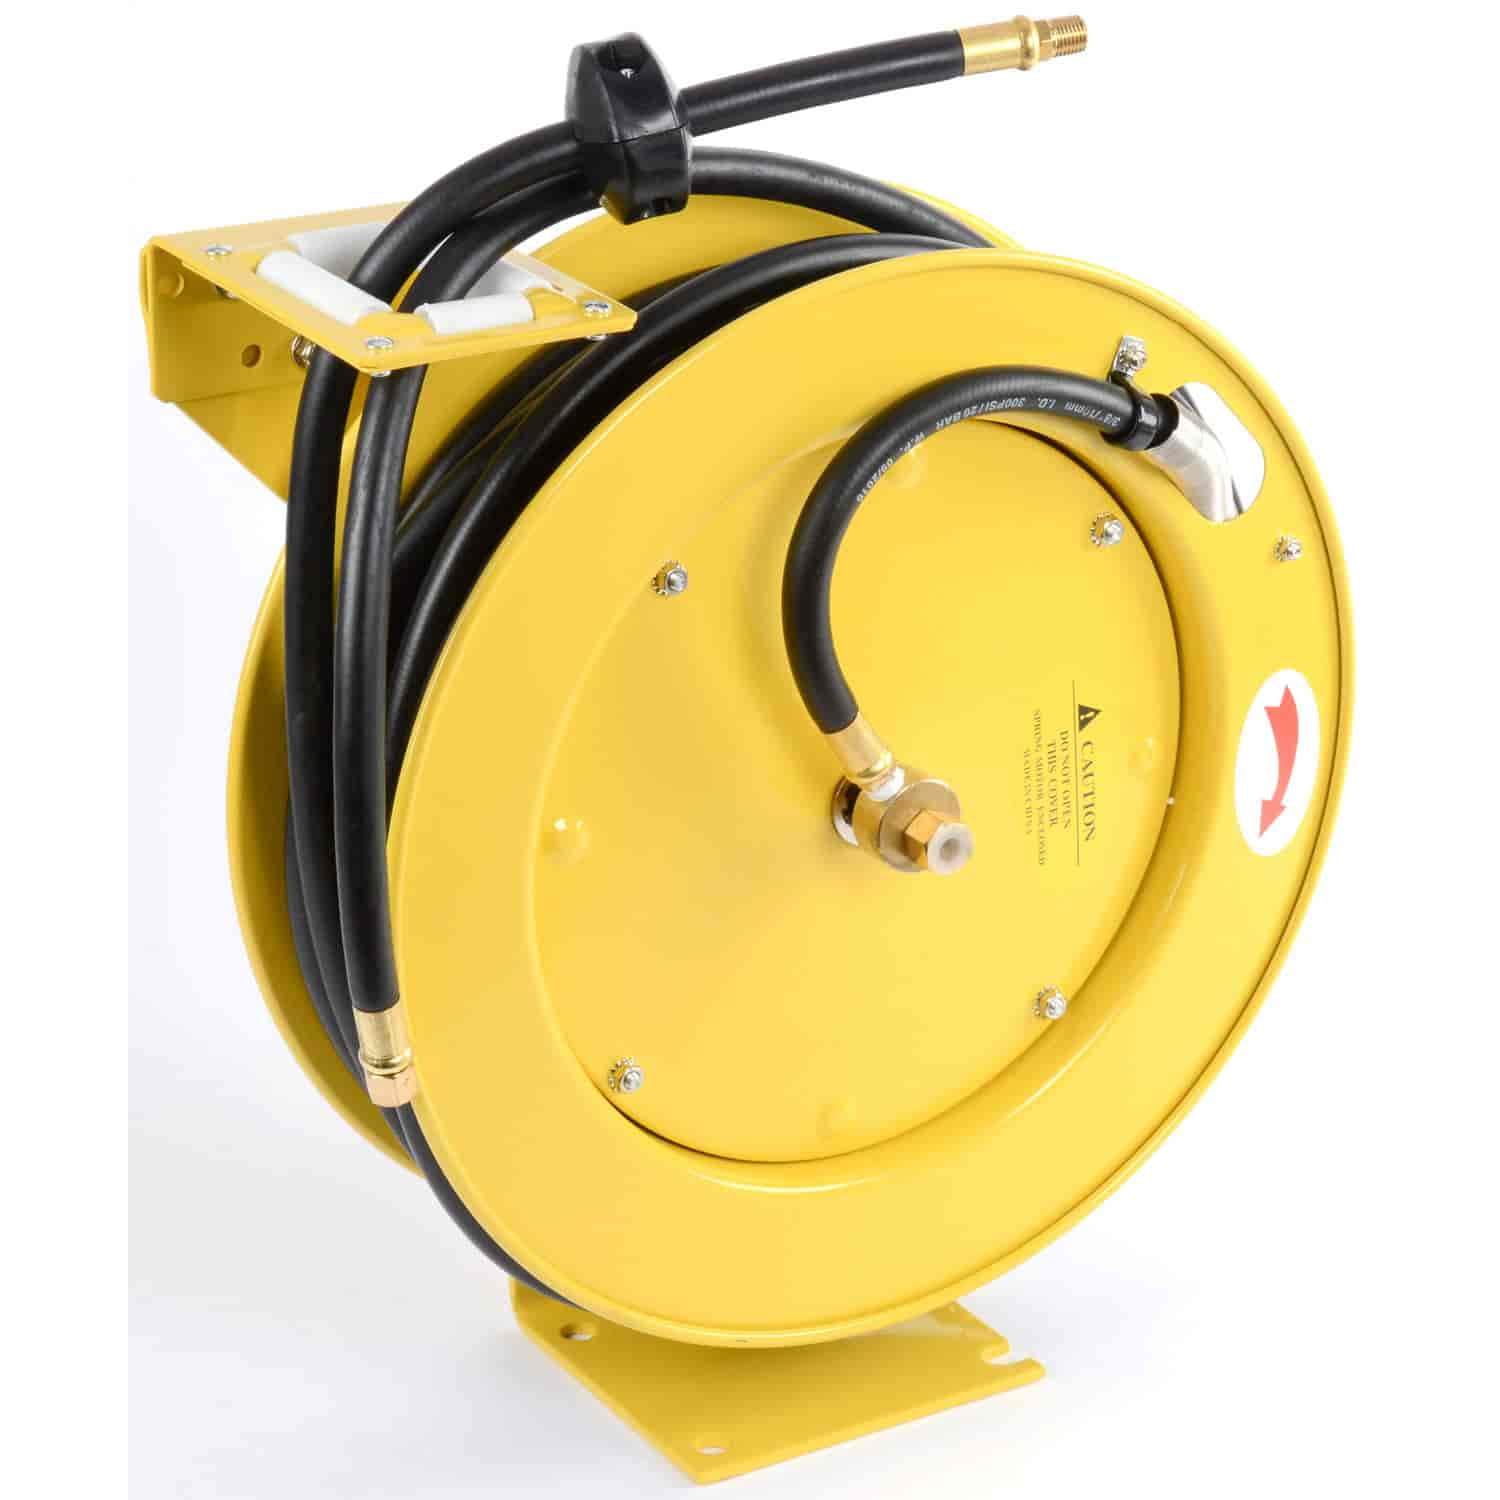 30 Foot Wind Up Hand Crank Air Hose Reel for Air Compressor Wall Mount